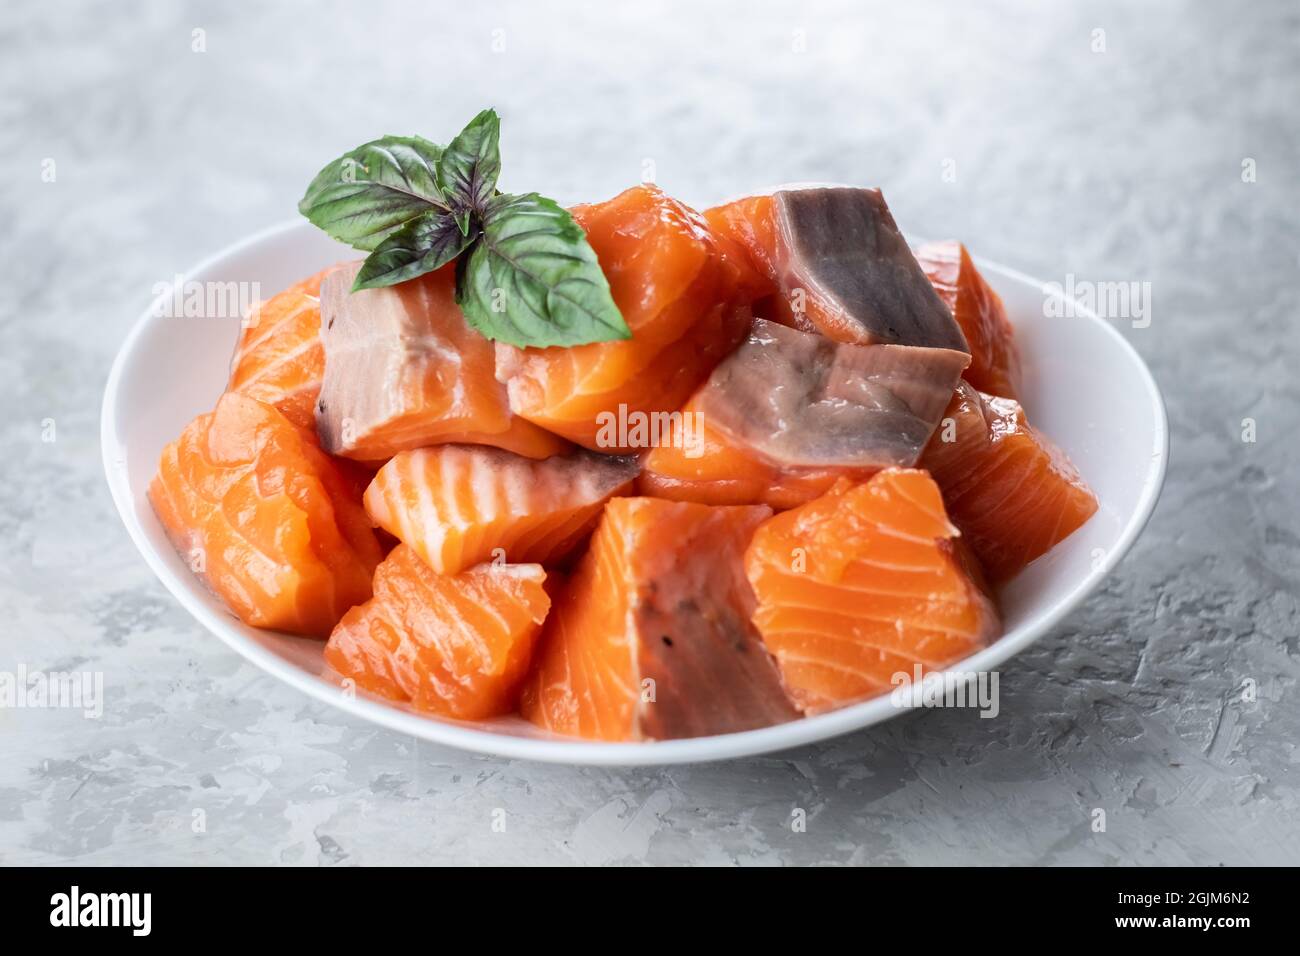 Pieces of salmon trout fillet fish in white plate closeup. Food photography Stock Photo